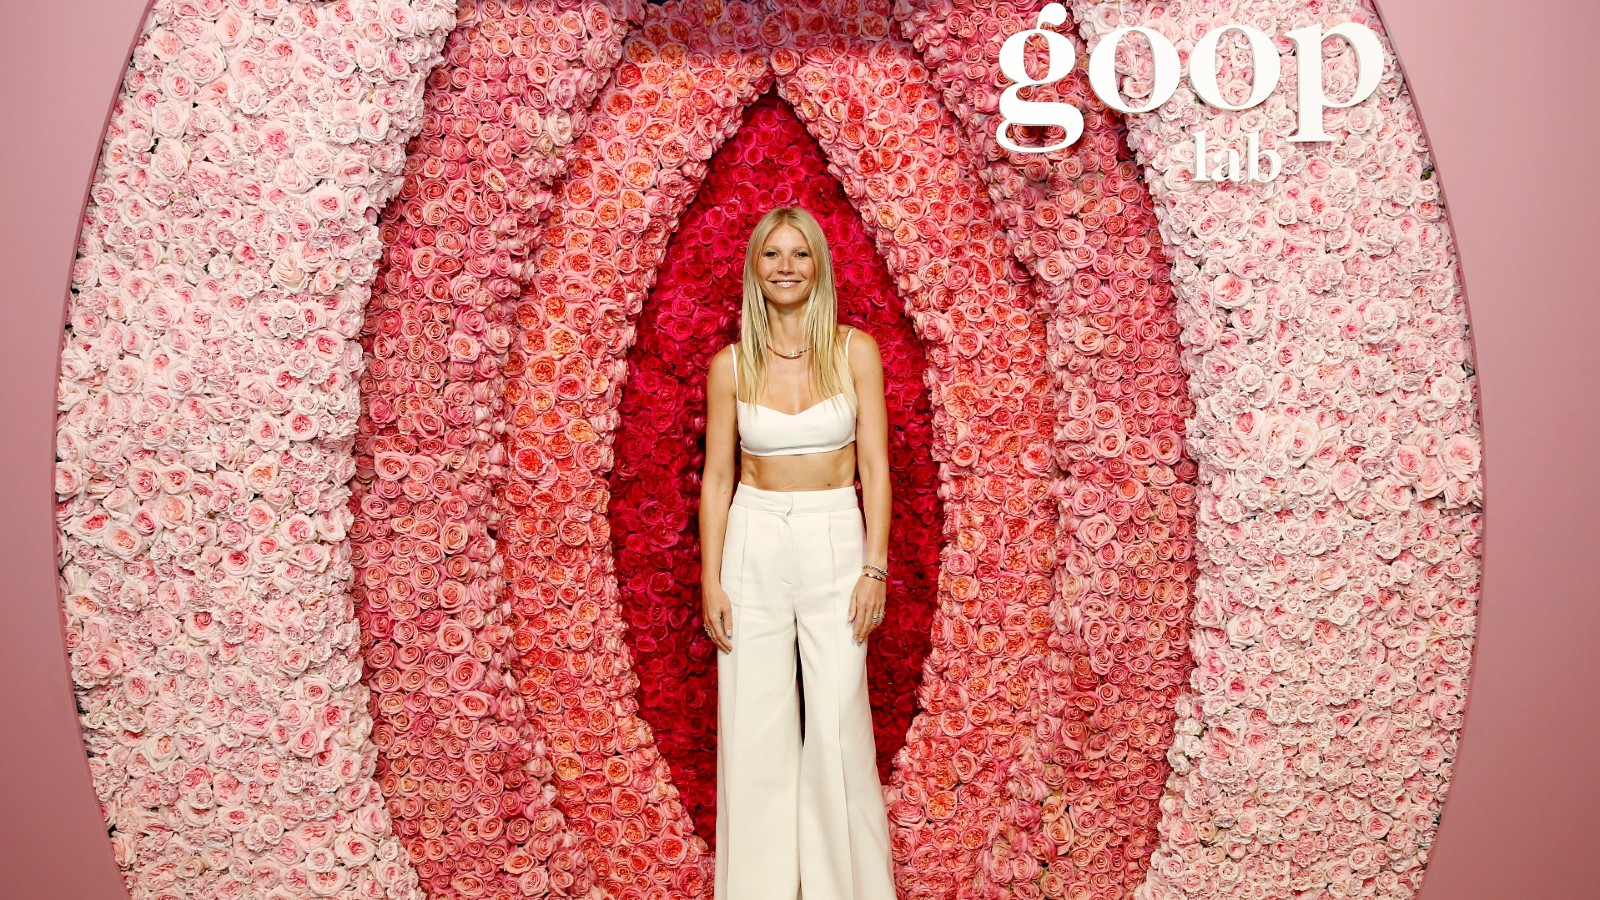 What is Gwyneth Paltrow's Goop brand and how much do Goop products cost?. Woman & Home